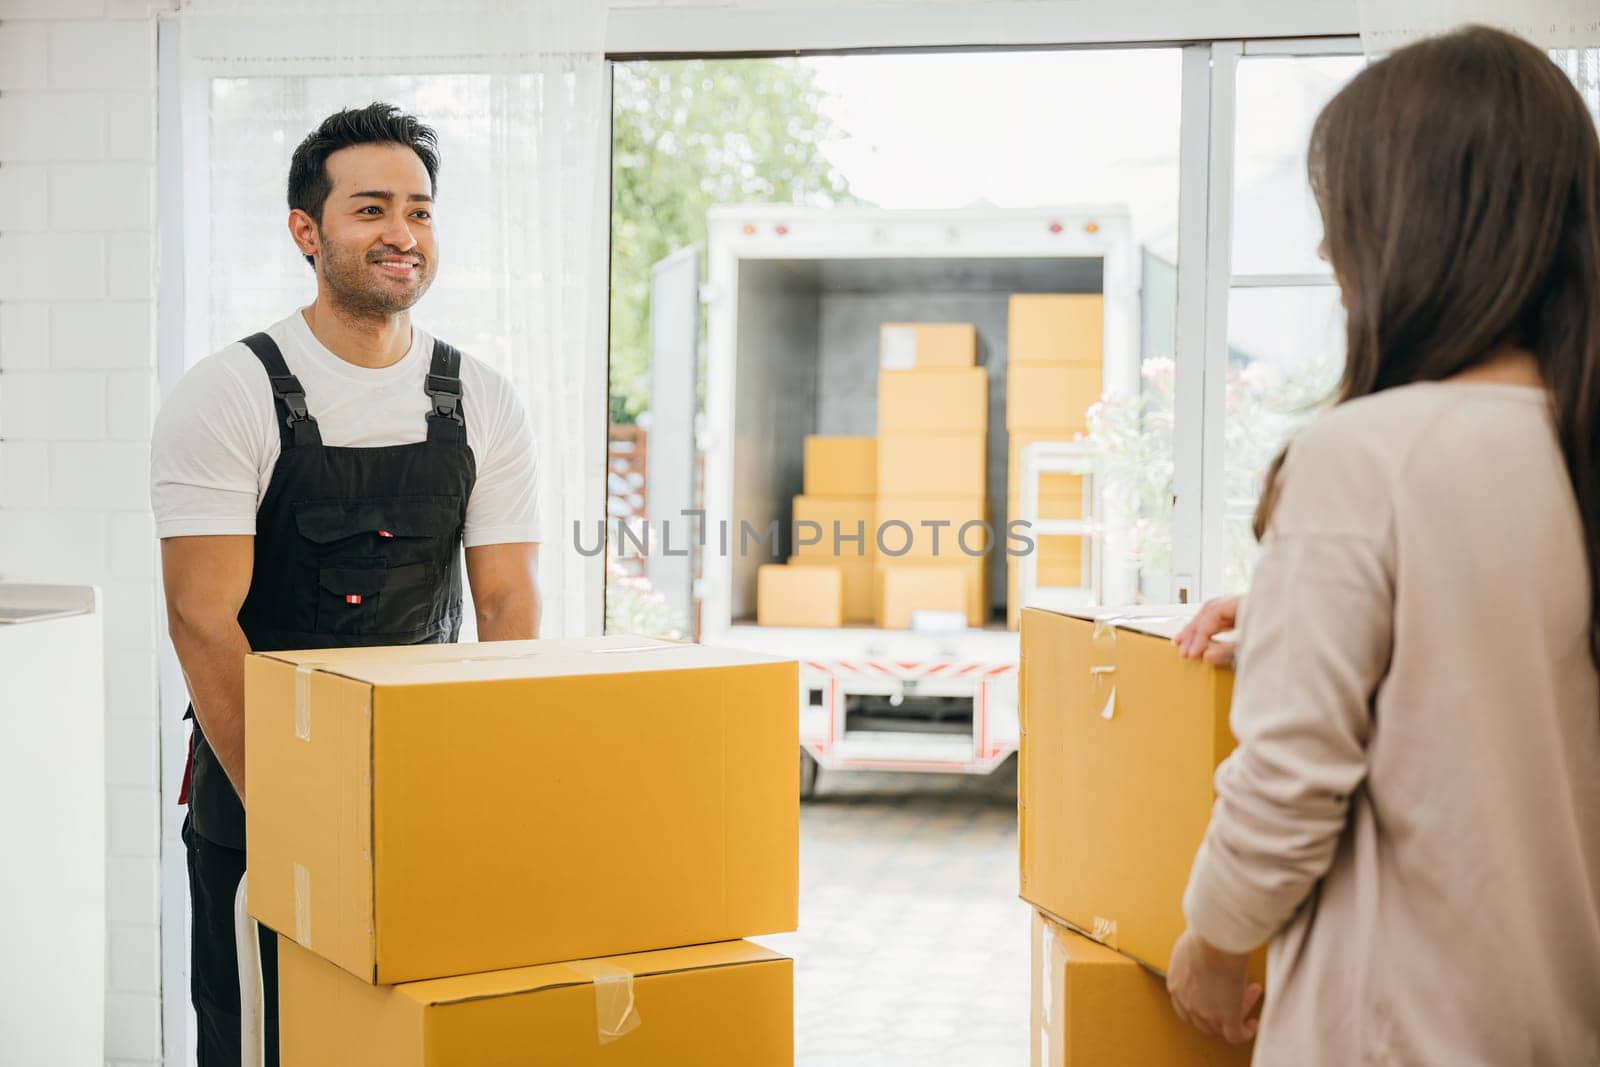 Couple receives expert moving service inside their home. Uniformed movers unload boxes from truck ensuring customer satisfaction. Professional service and teamwork are evident. Moving new house